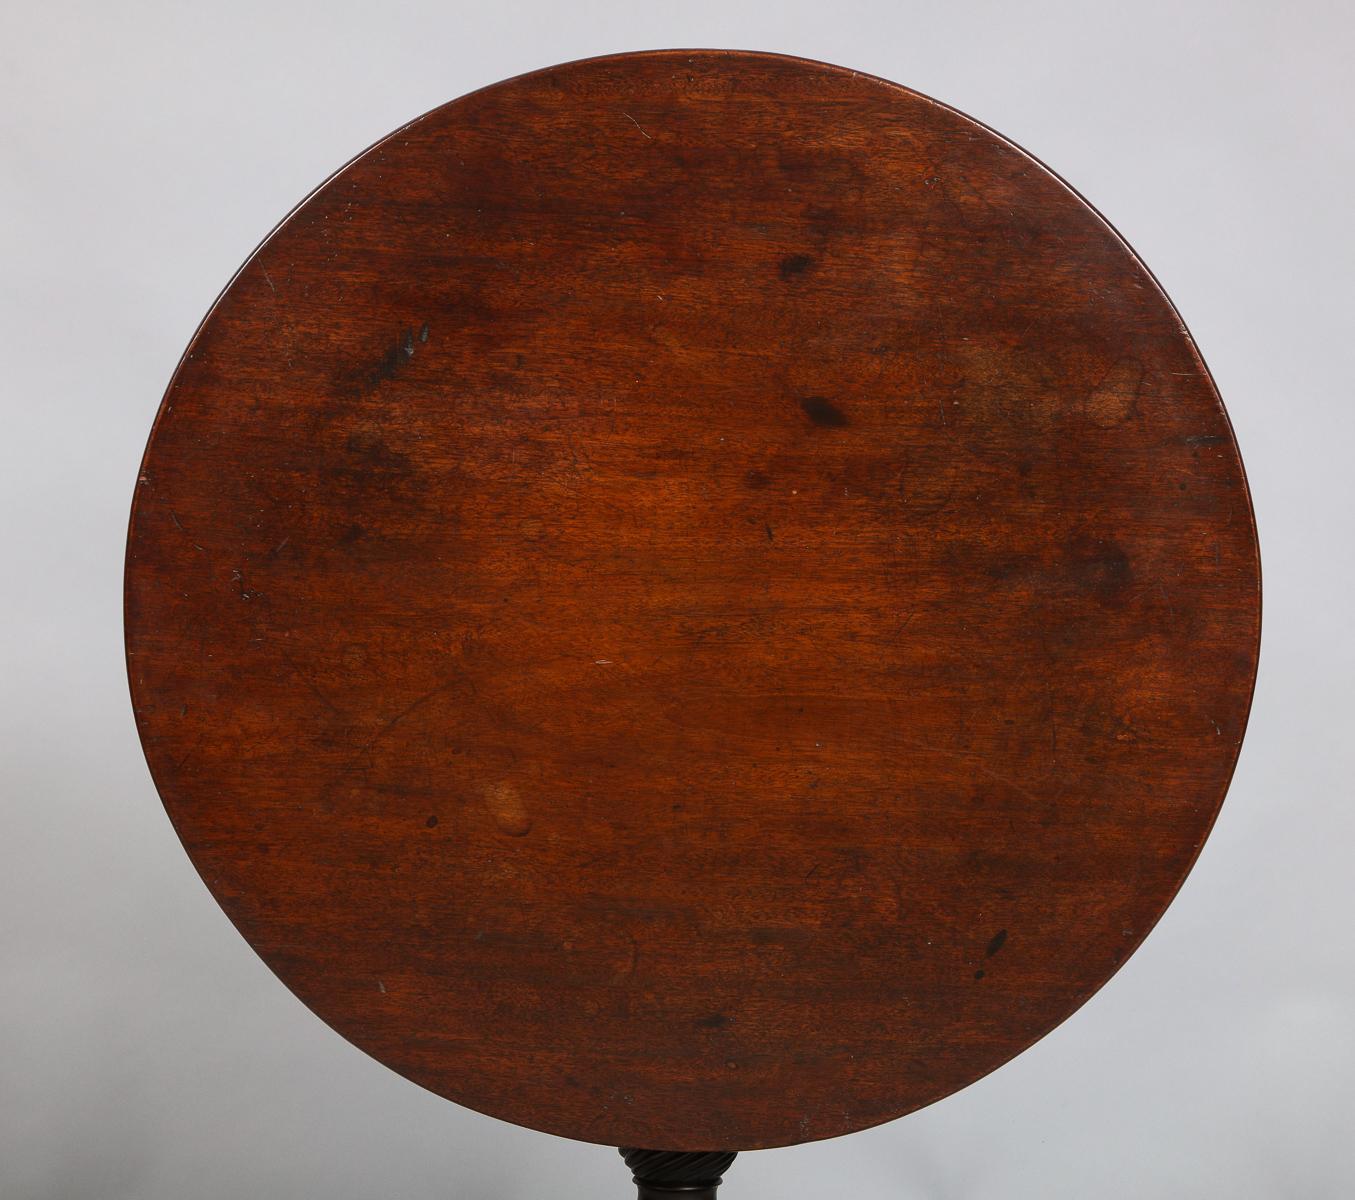 Good mid-18th century English mahogany tilt-top table with single plank circular top over balustrade turned shaft with spiral fluted urn base, the three cabriole legs ending in slipper feet, the whole possessing good rich color and patina.